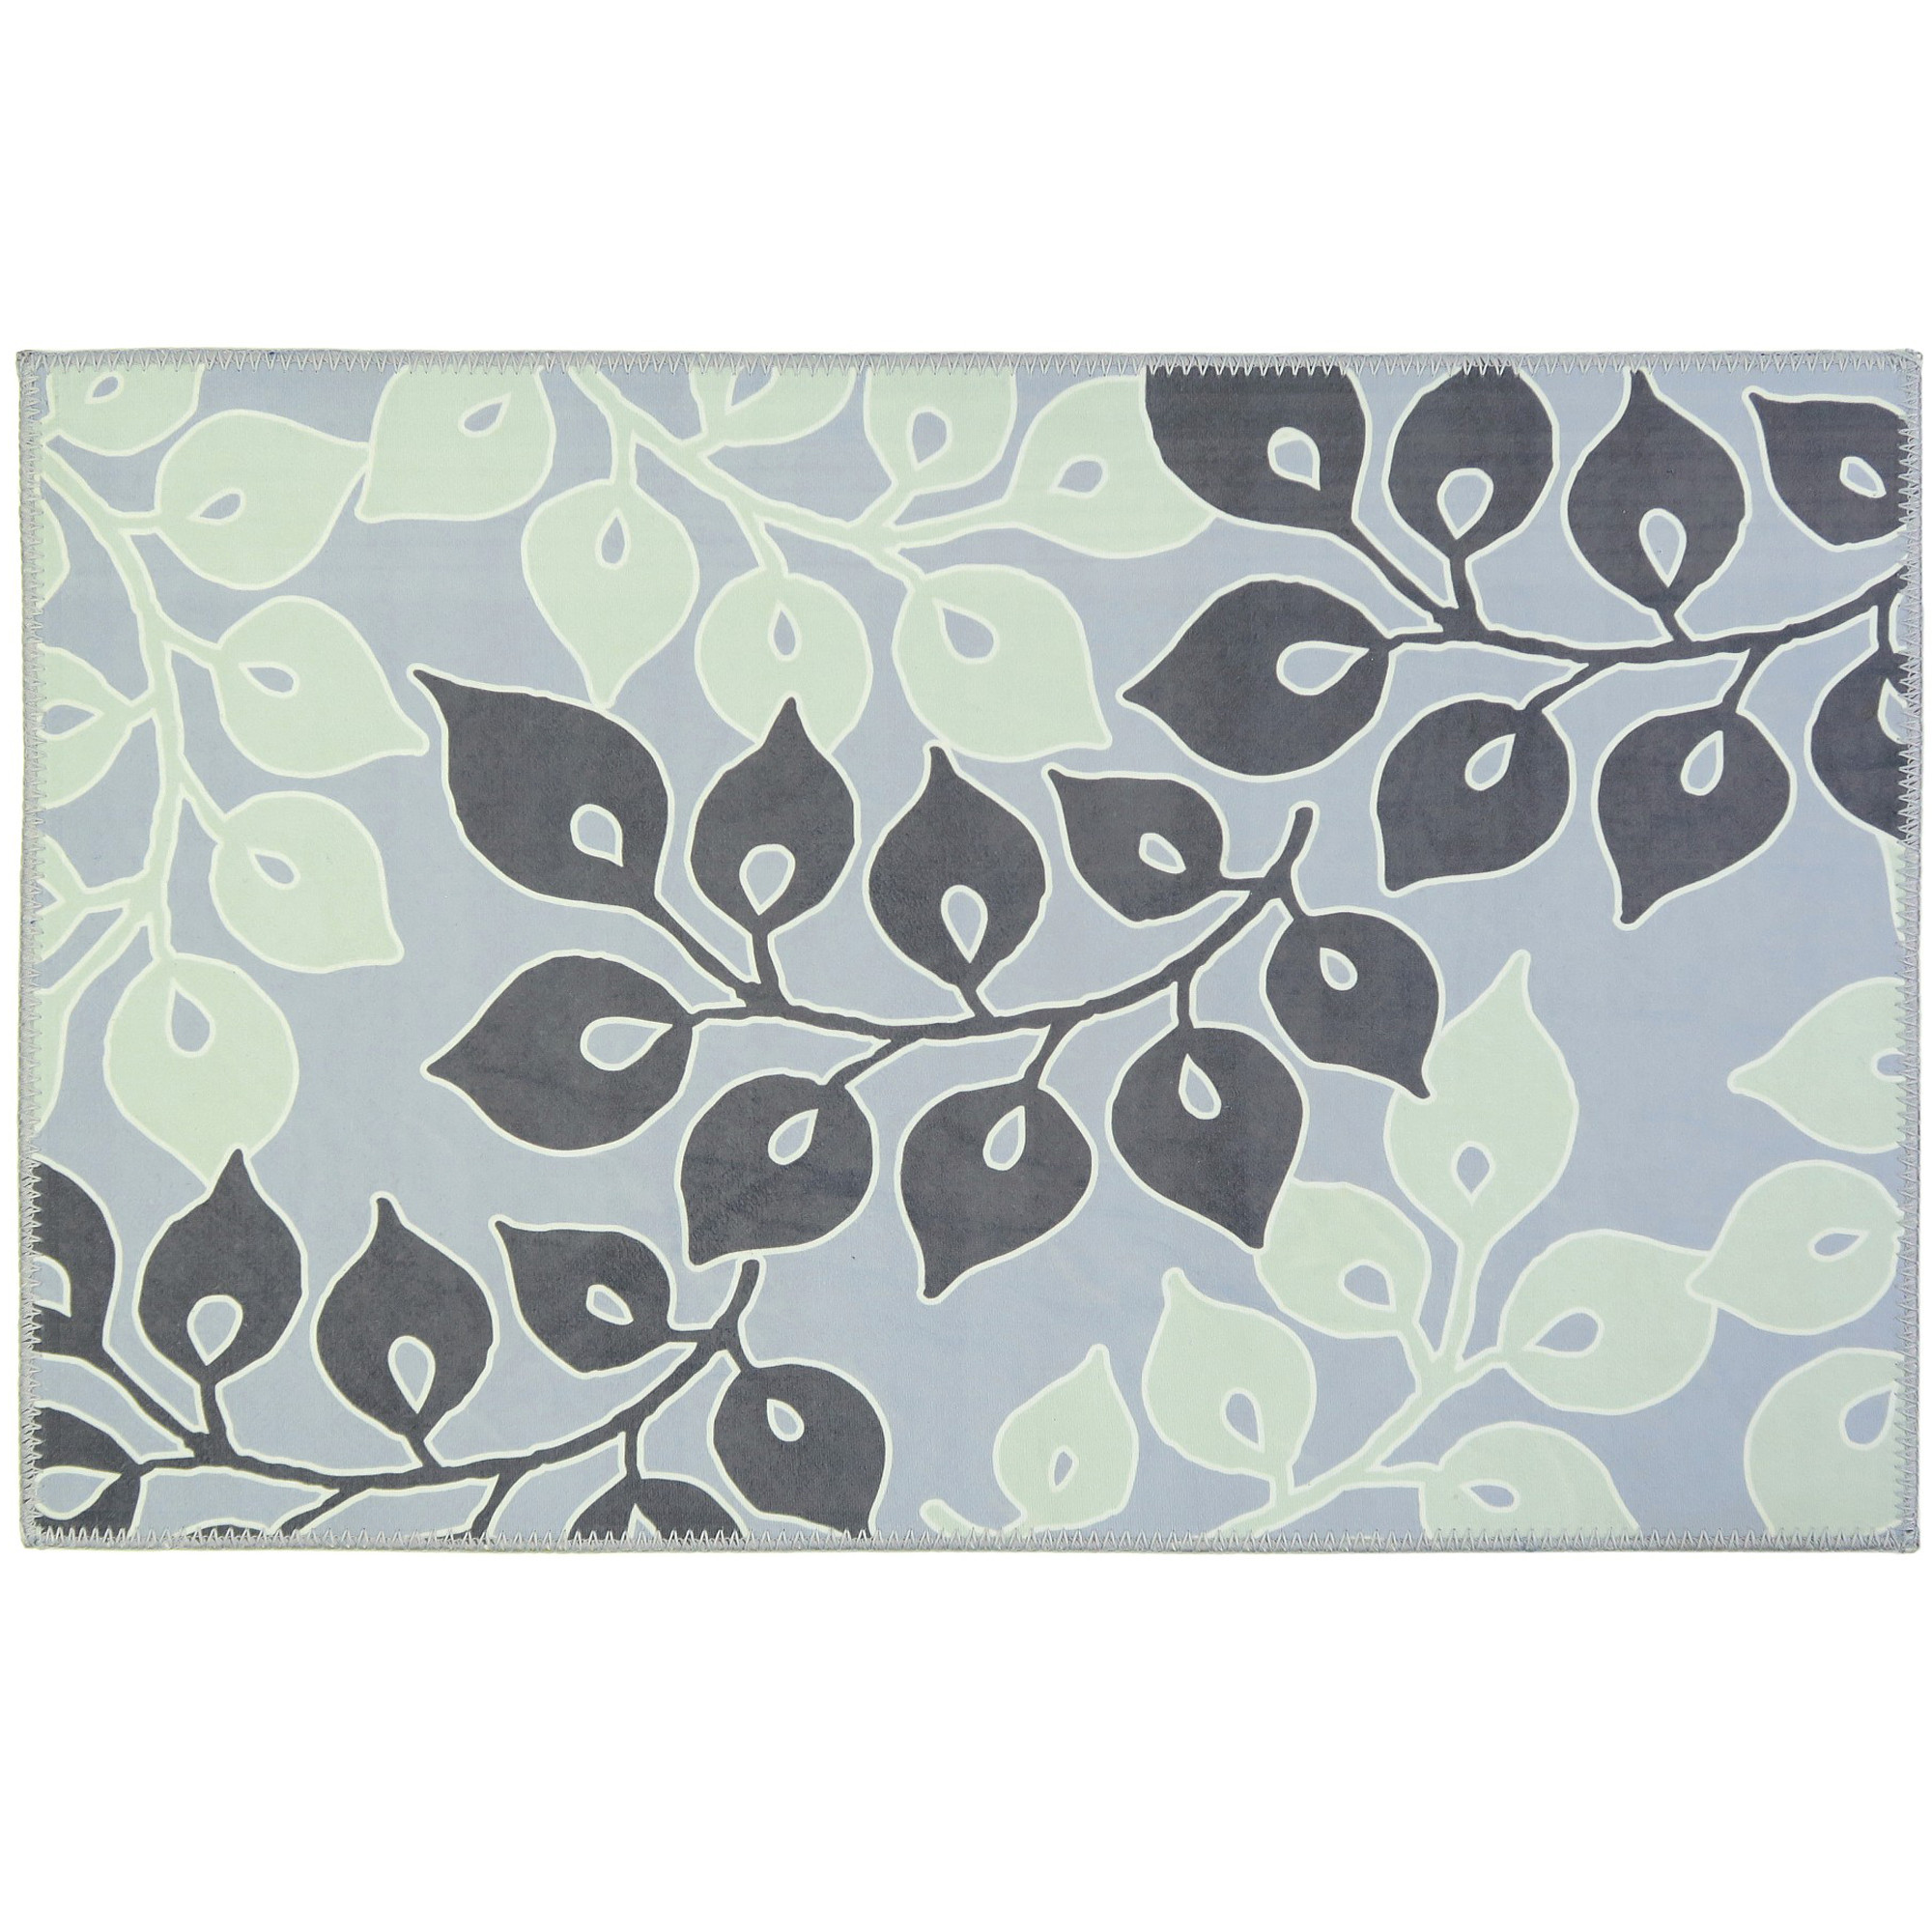 Serenity Garden Homefires Accent Area Rug w/ Leaves  - Multiple Sizes